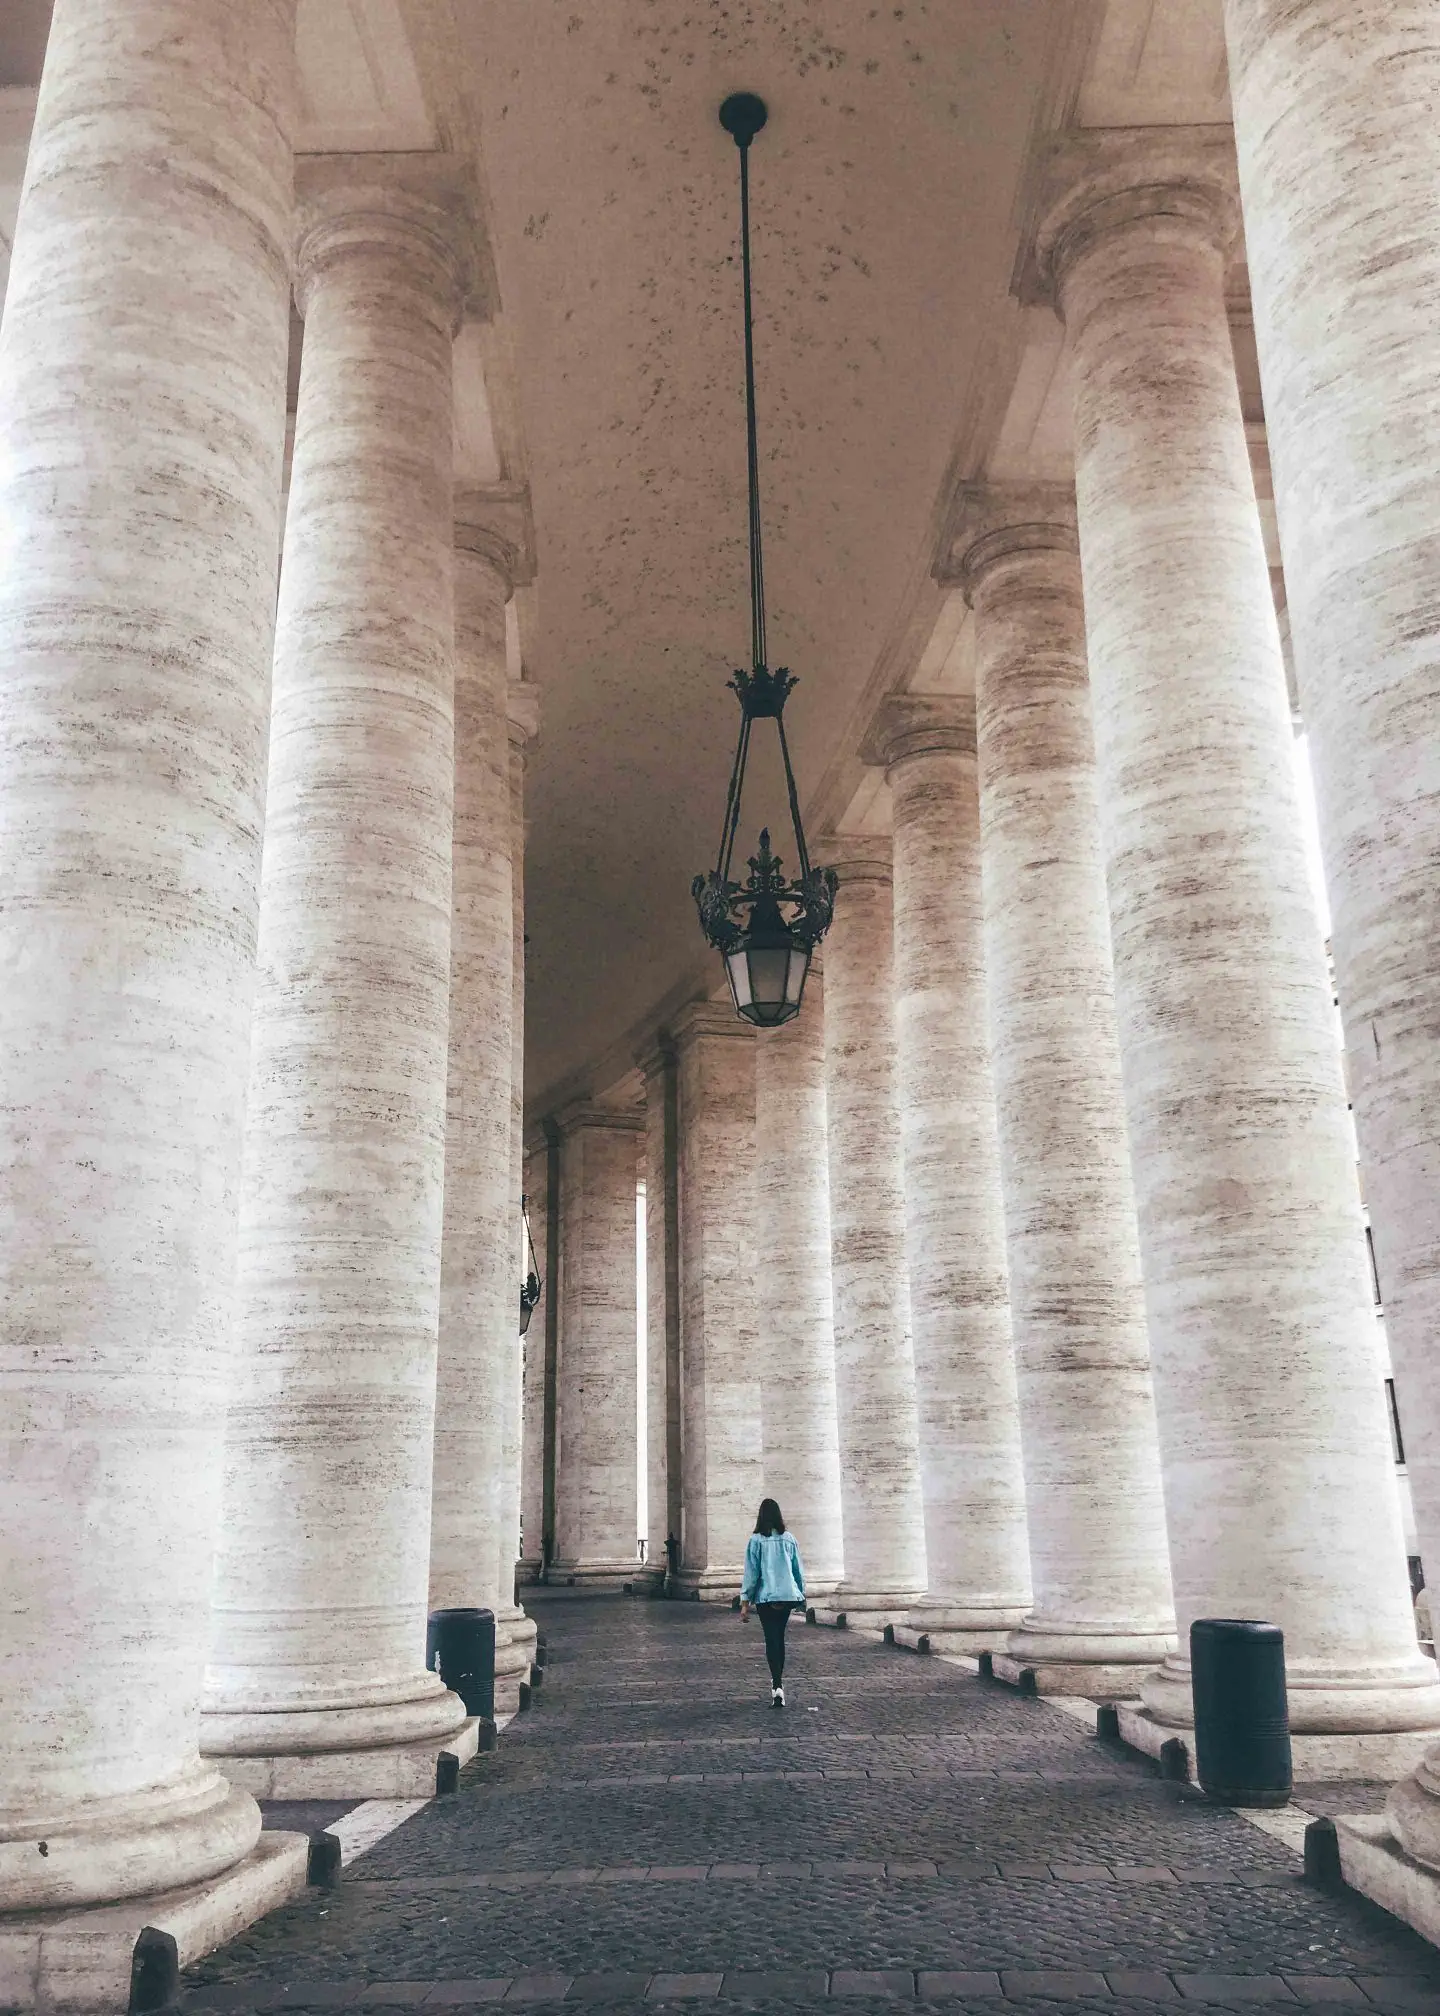 How To Visit The Vatican (A Massive Travel Guide)